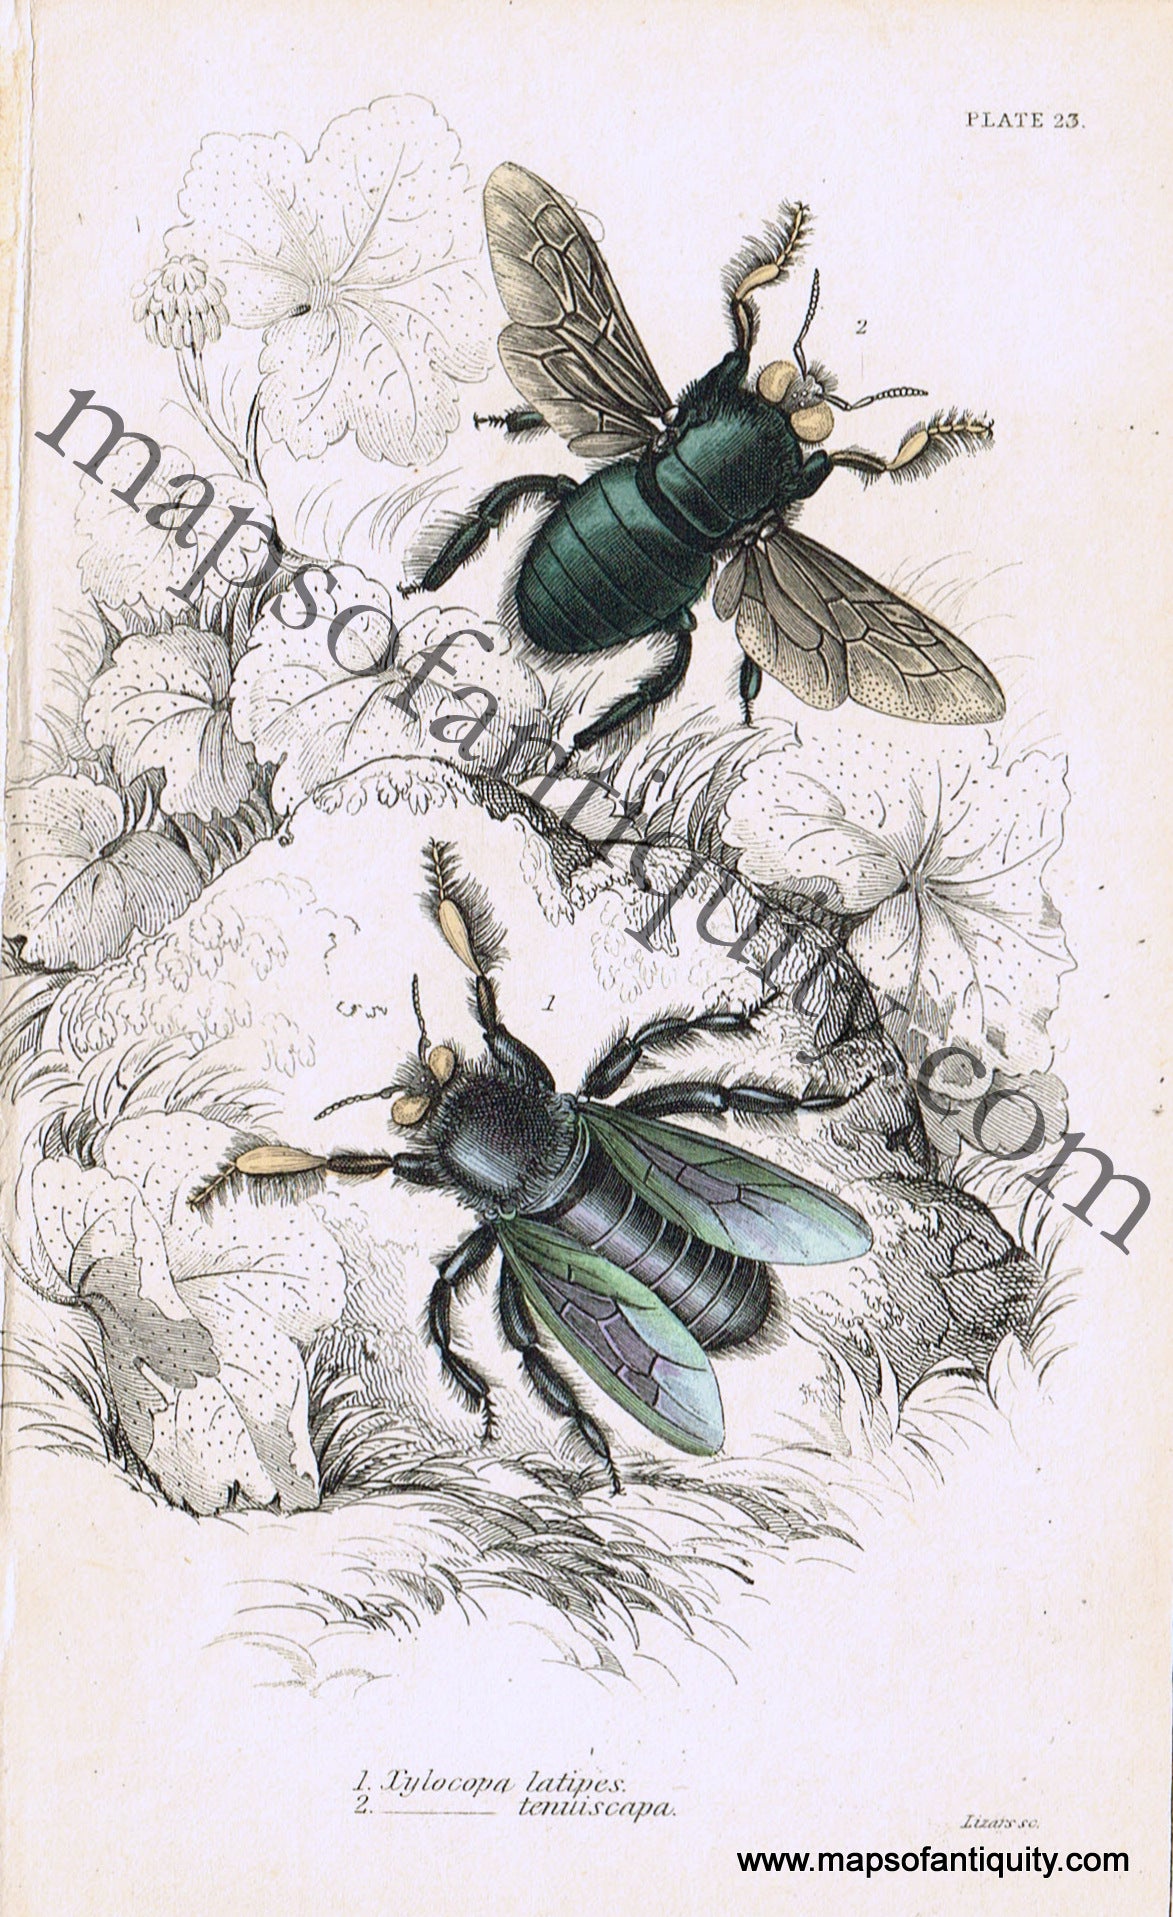 Antique-Hand-Colored-Print-Xylocopa-latipes-&-Xylocopa-tenuiscapa-Antique-Prints-Natural-History-Insects-1840-Duncan-Maps-Of-Antiquity